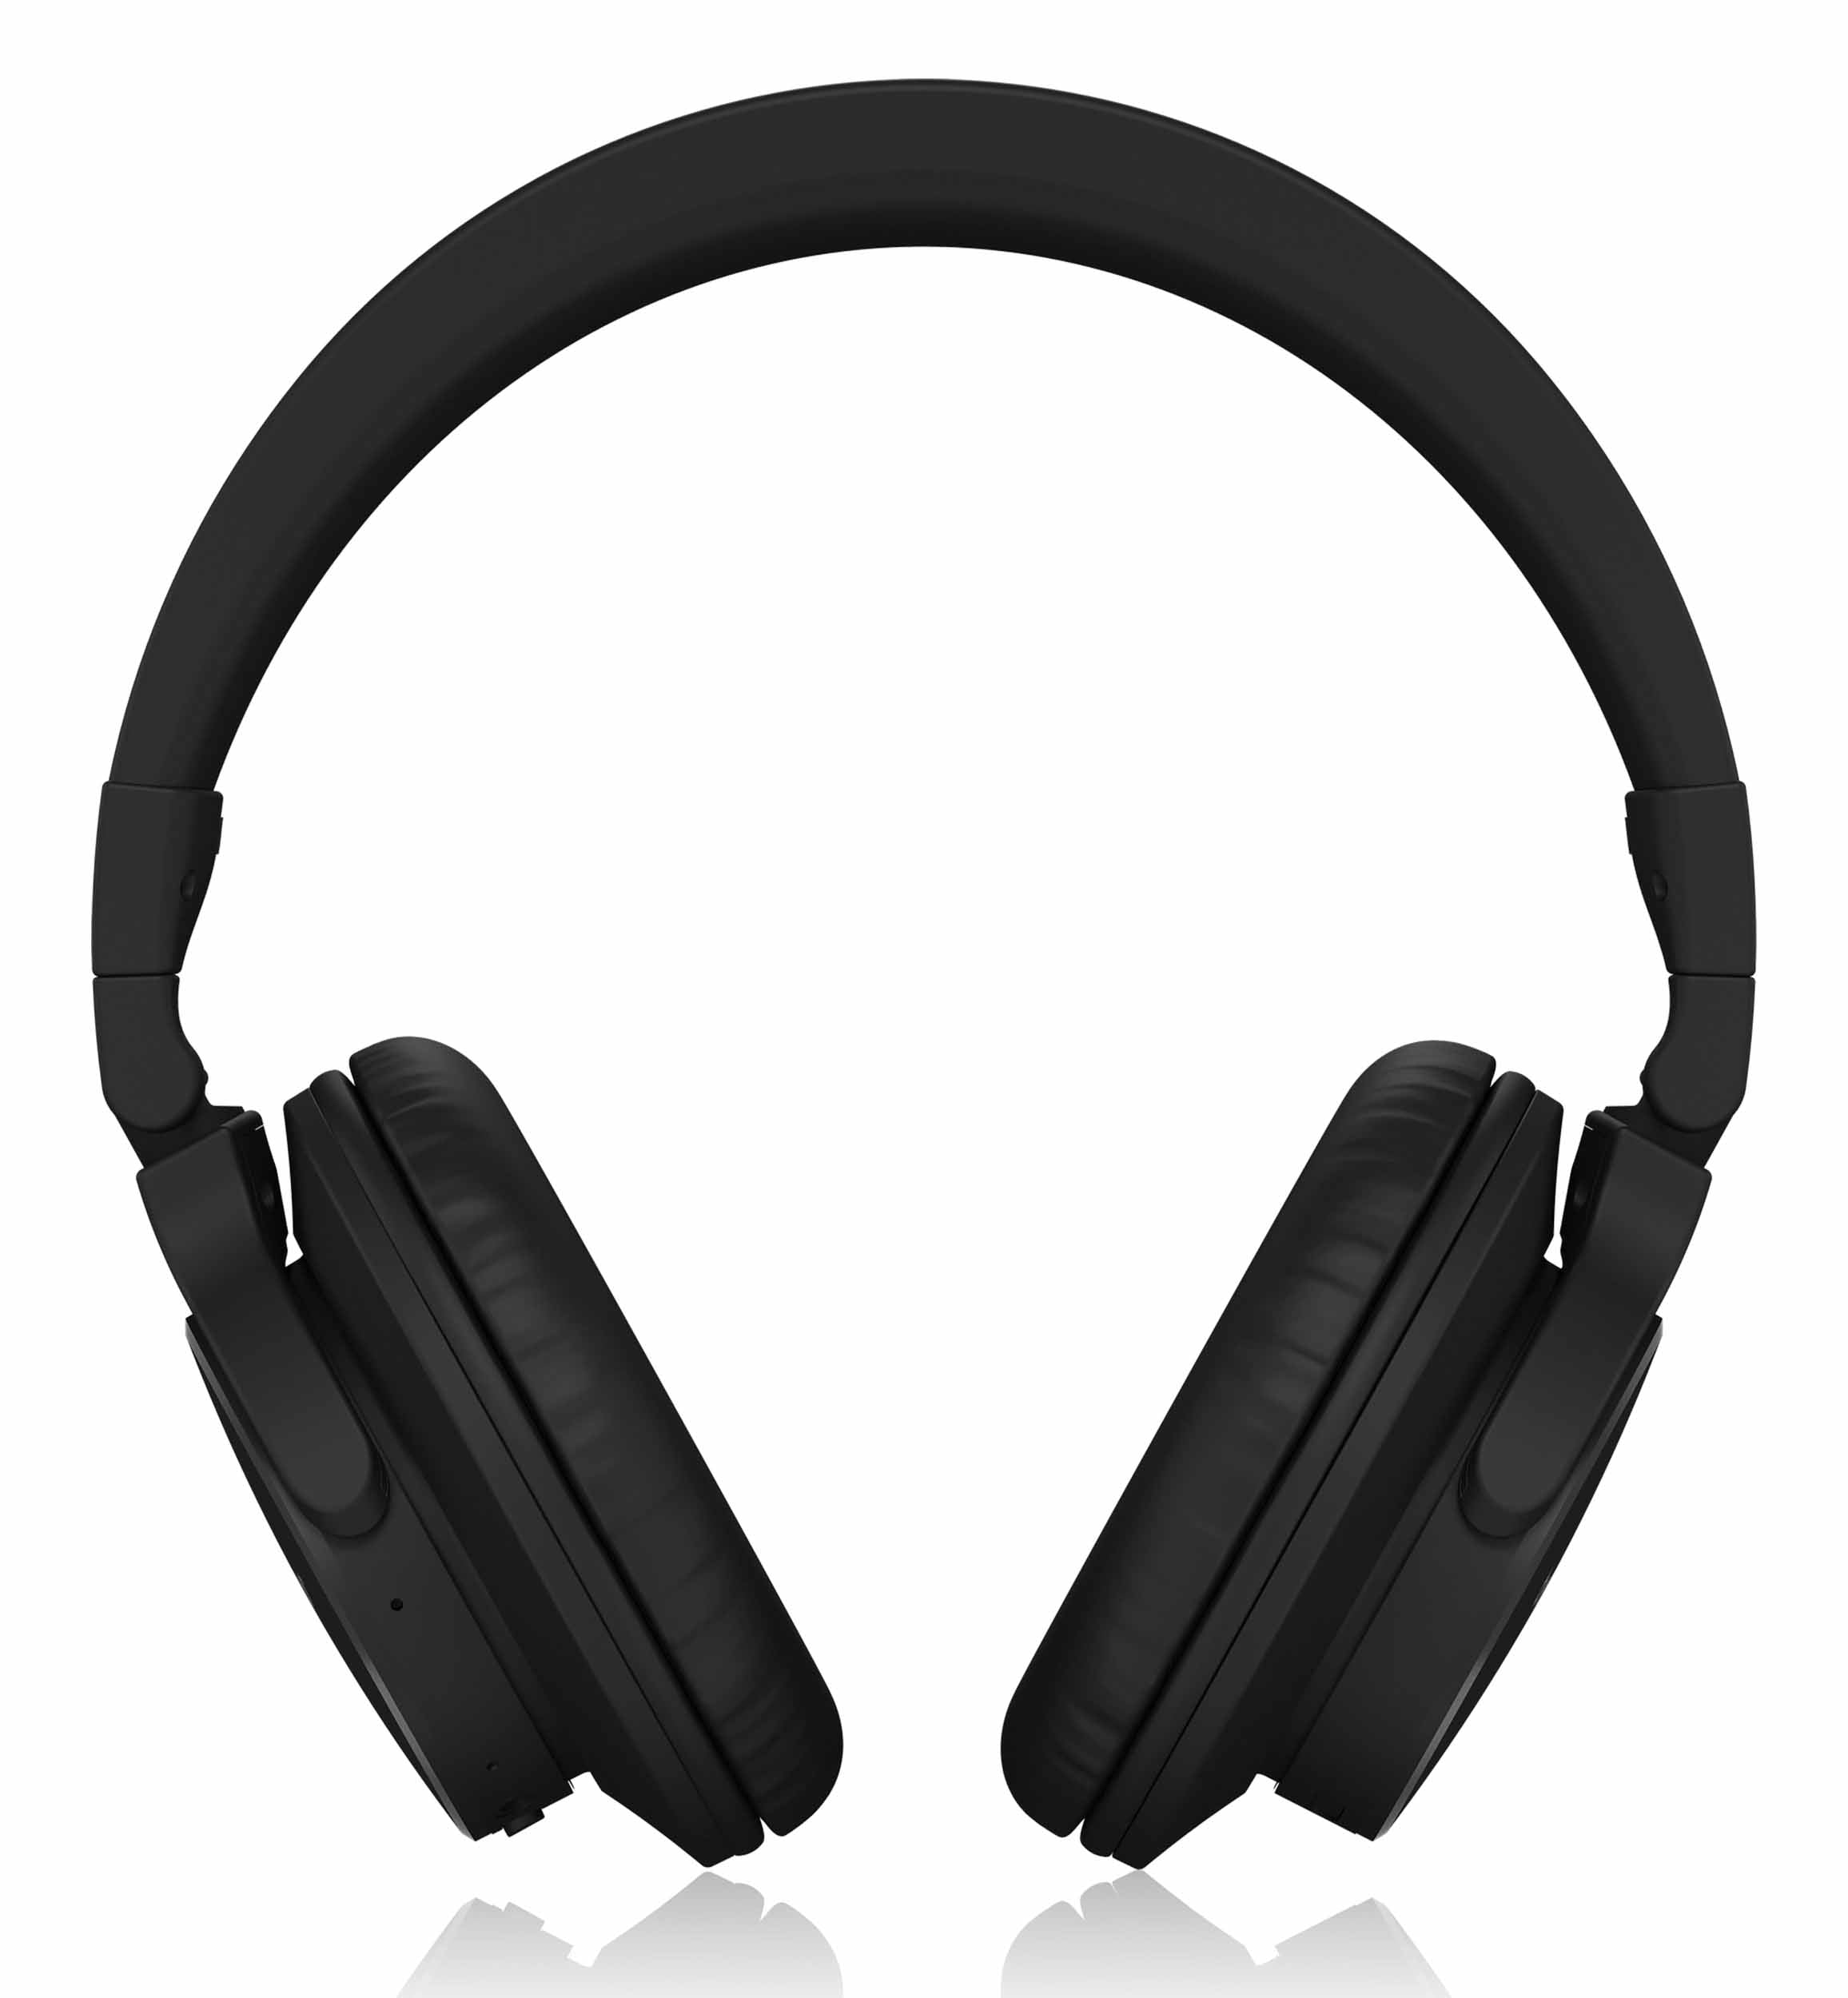 Behringer BH480NC Premium Reference-Class Headphones with Bluetooth and Active Noise Cancellation by Behringer